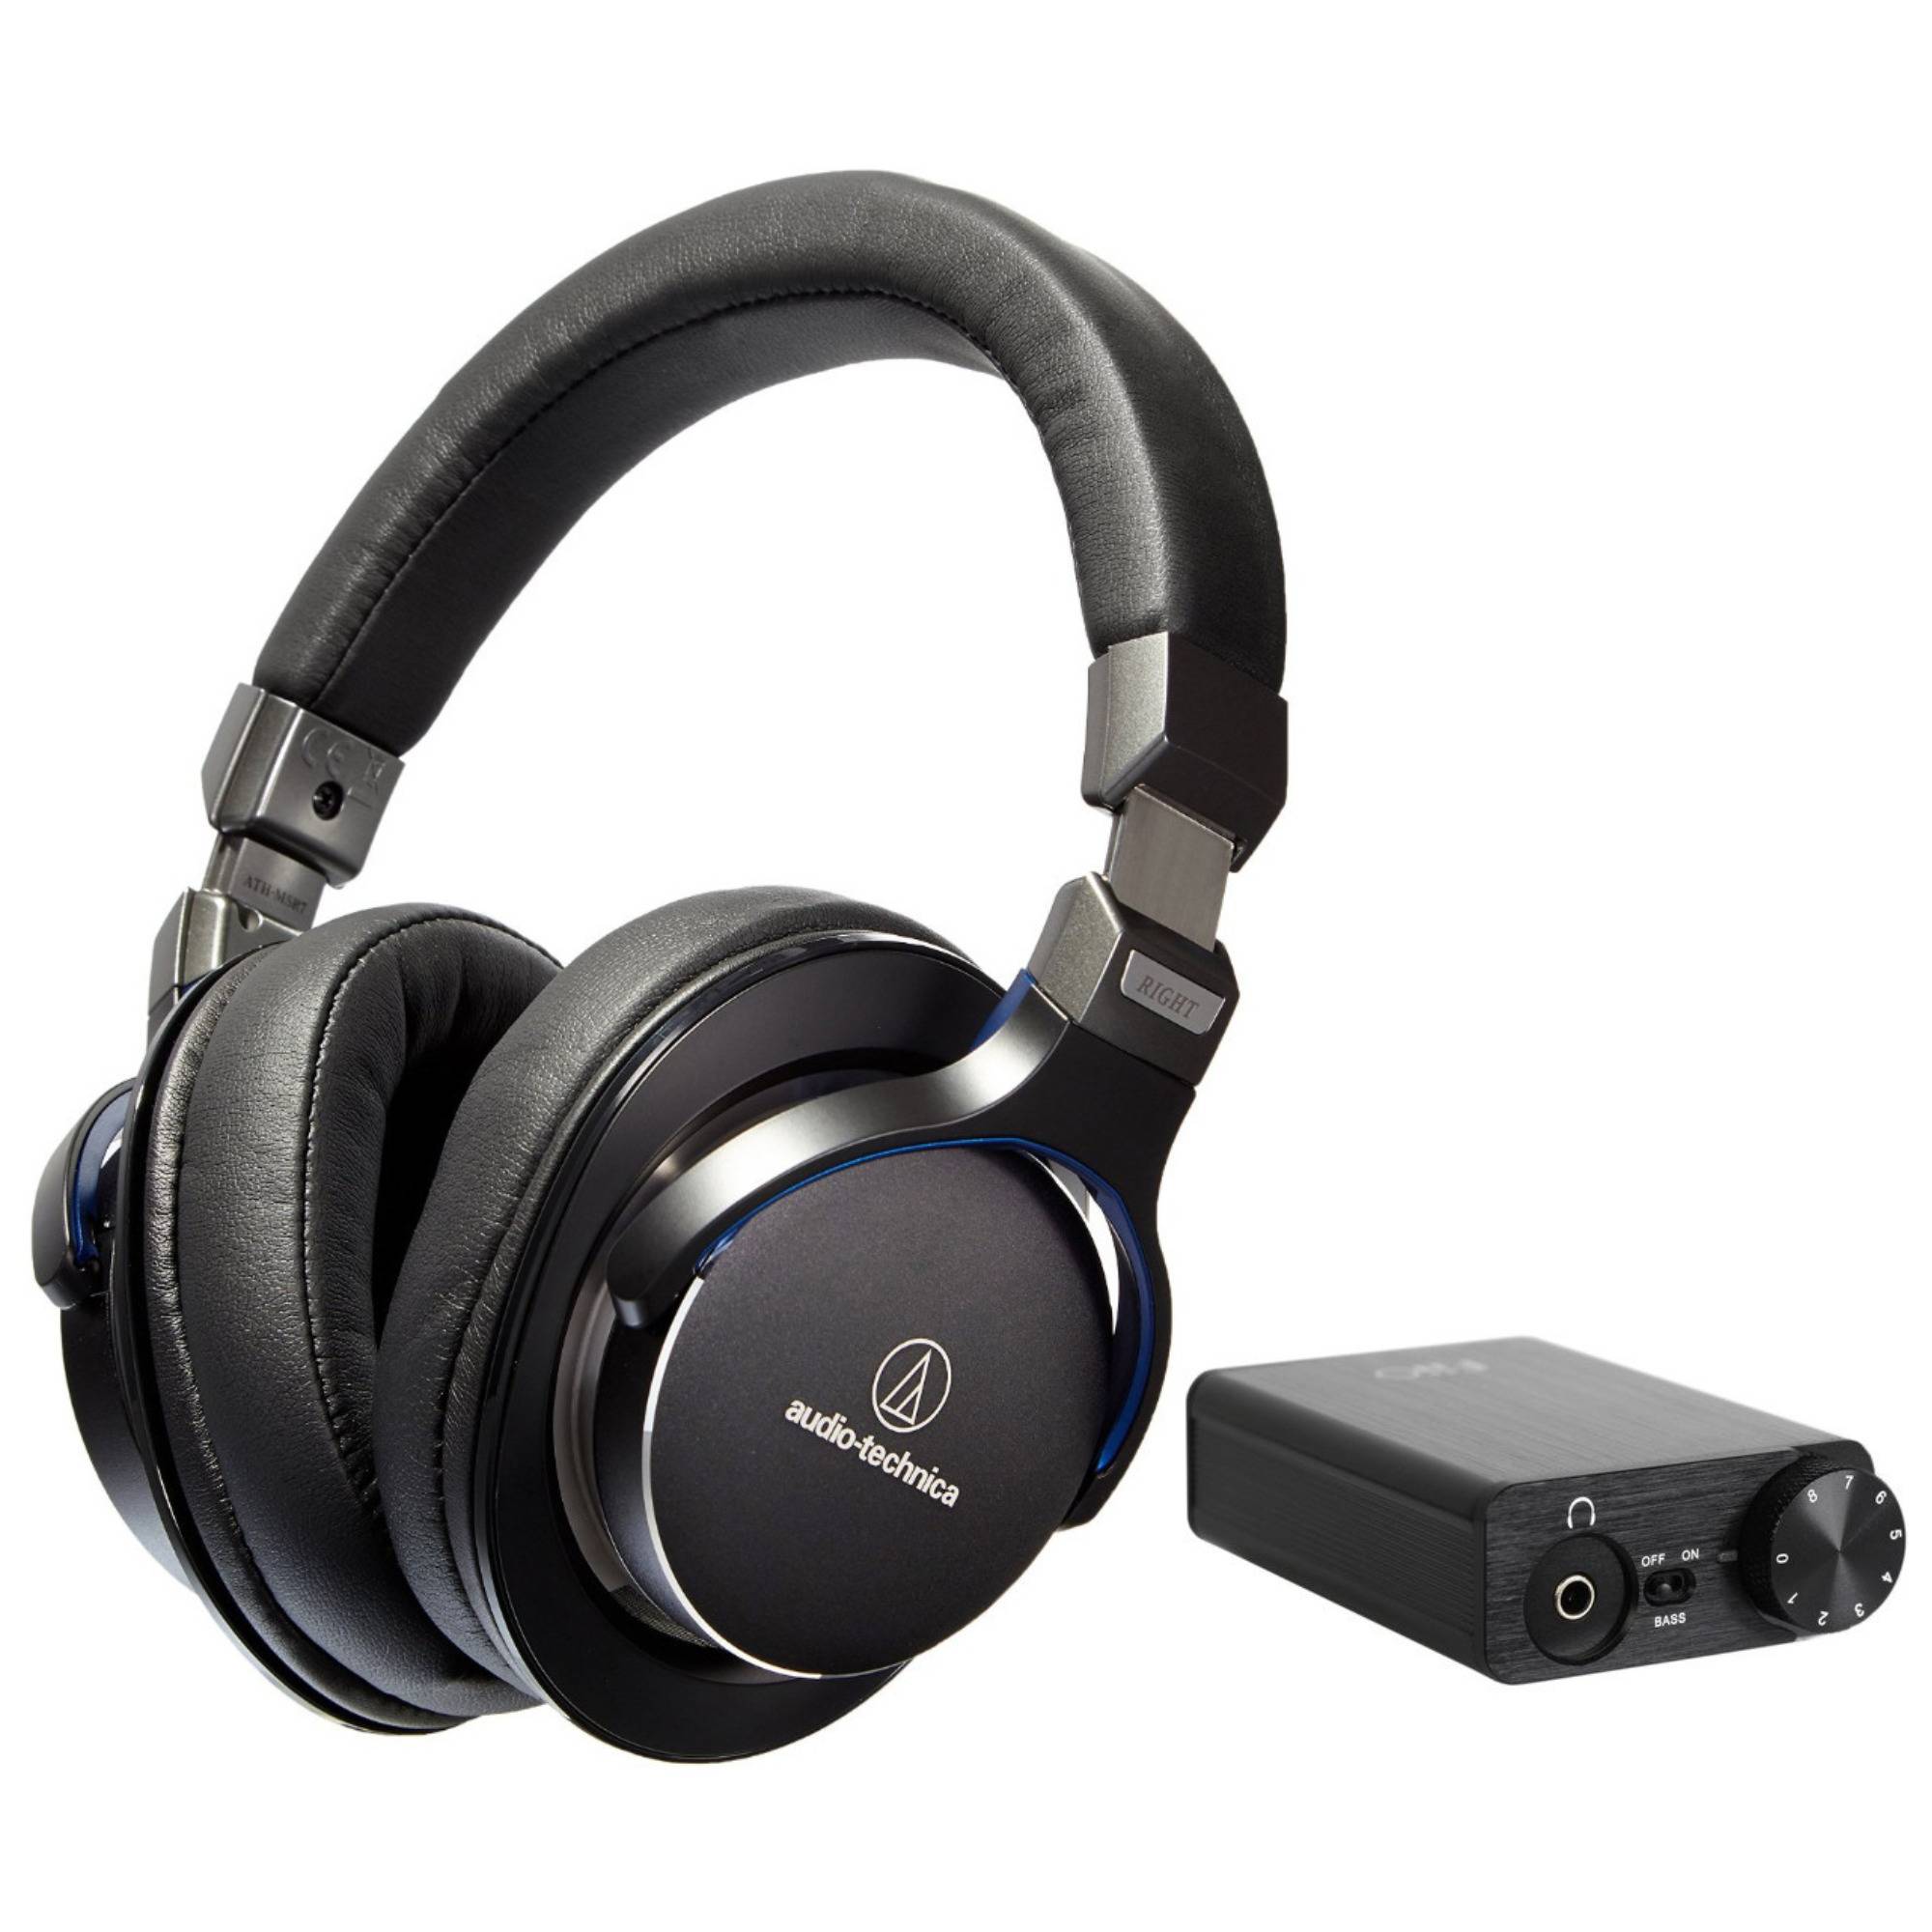 Audio-Technica Over-Ear Hi-Res Headphones with FiiO Headphone Amp and Cable